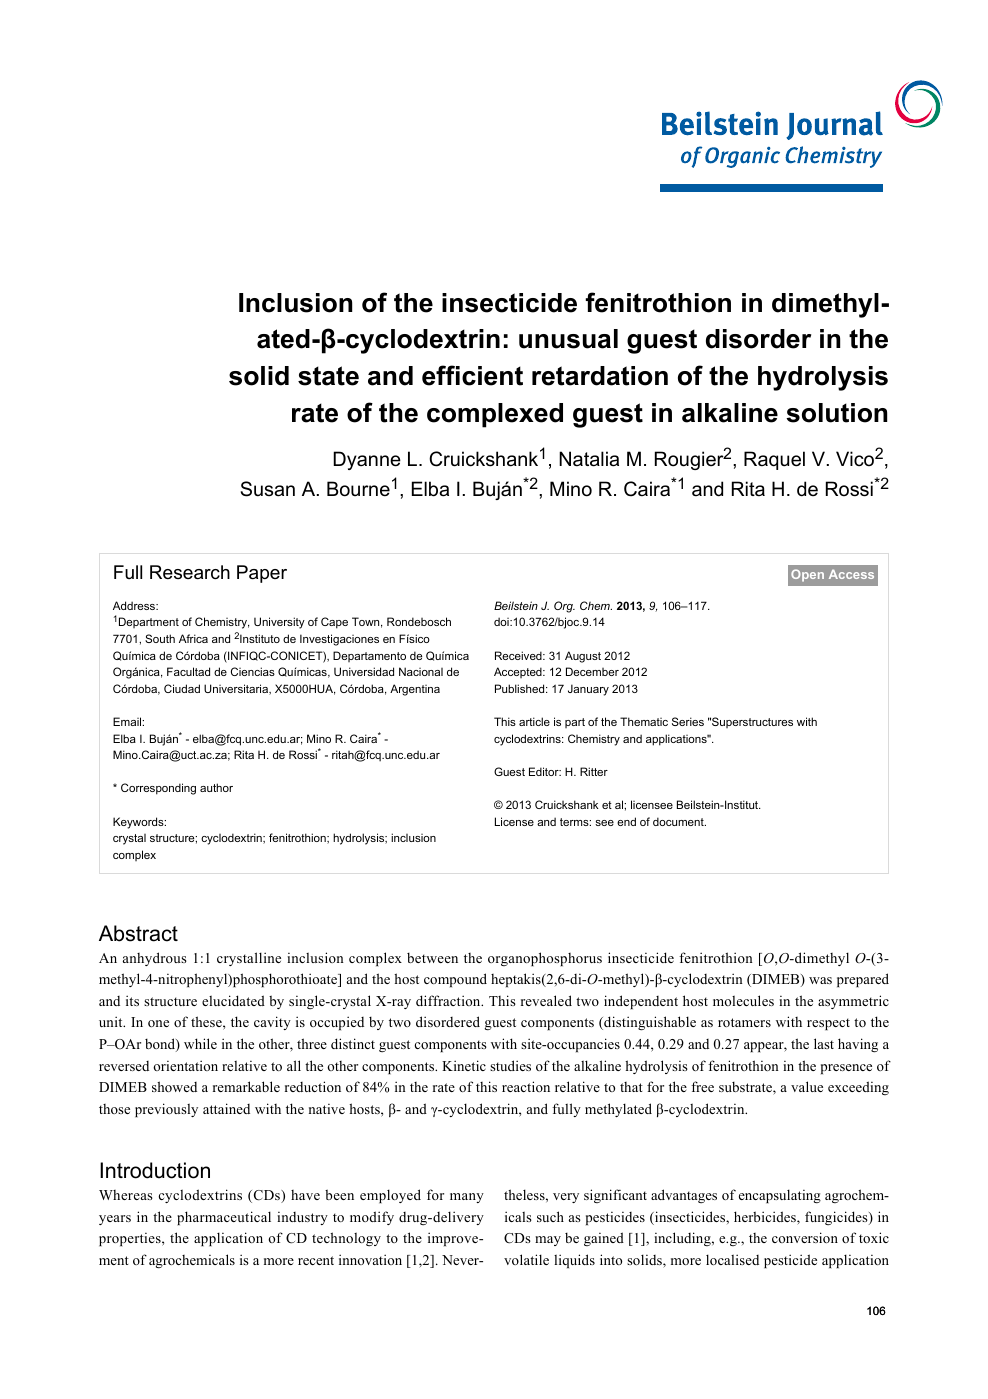 Inclusion Of The Insecticide Fenitrothion In Dimethylated B Cyclodextrin Unusual Guest Disorder In The Solid State And Efficient Retardation Of The Hydrolysis Rate Of The Complexed Guest In Alkaline Solution Topic Of Research